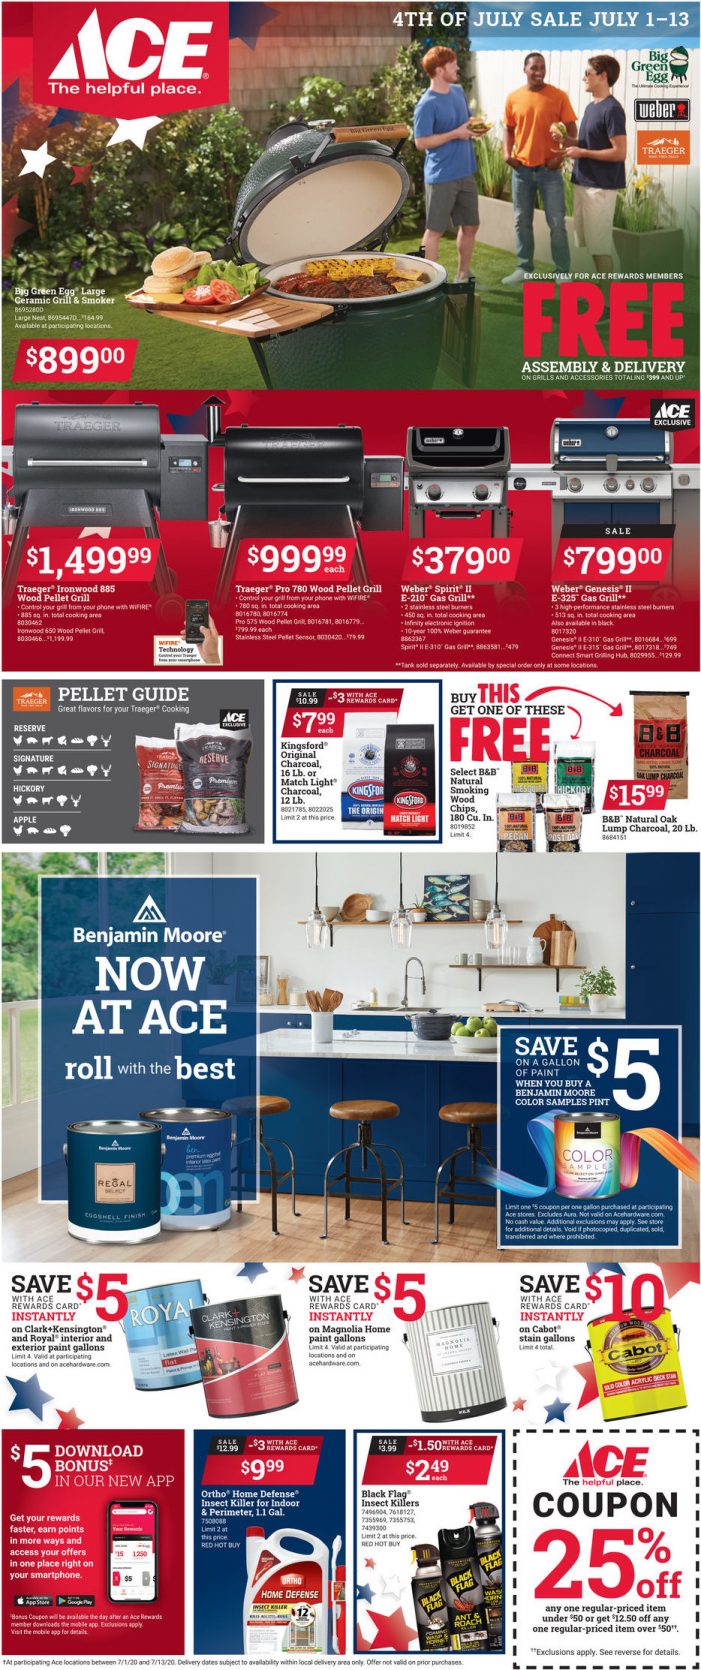 The Big Ace Home Center 4th of July Ad.  Celebrate Independence with Great Savings